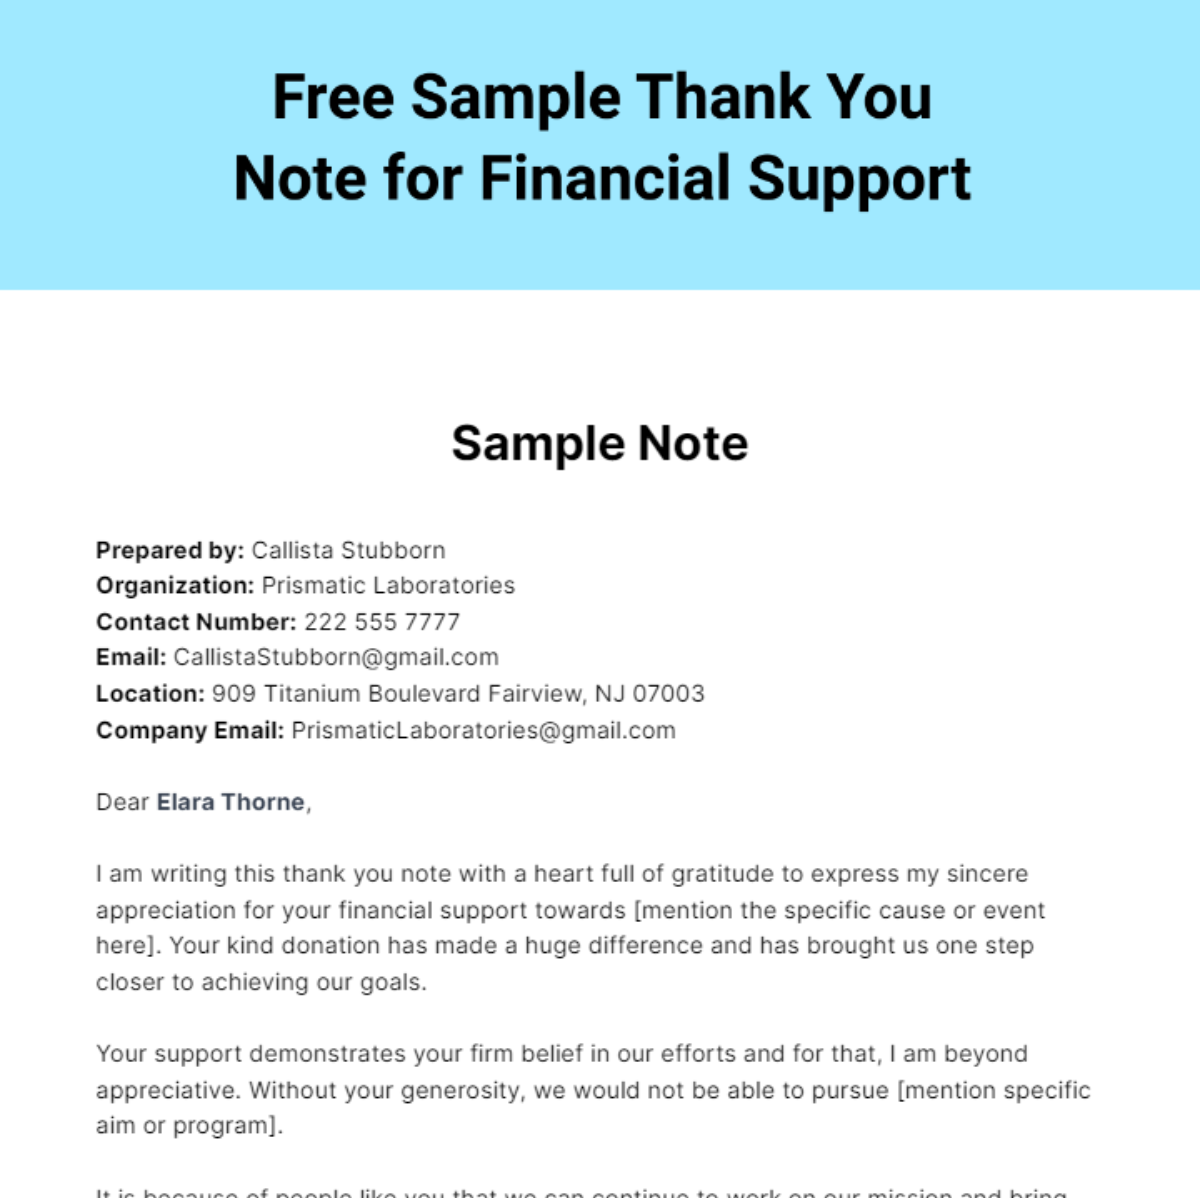 Sample Thank you Note for Financial Support Template